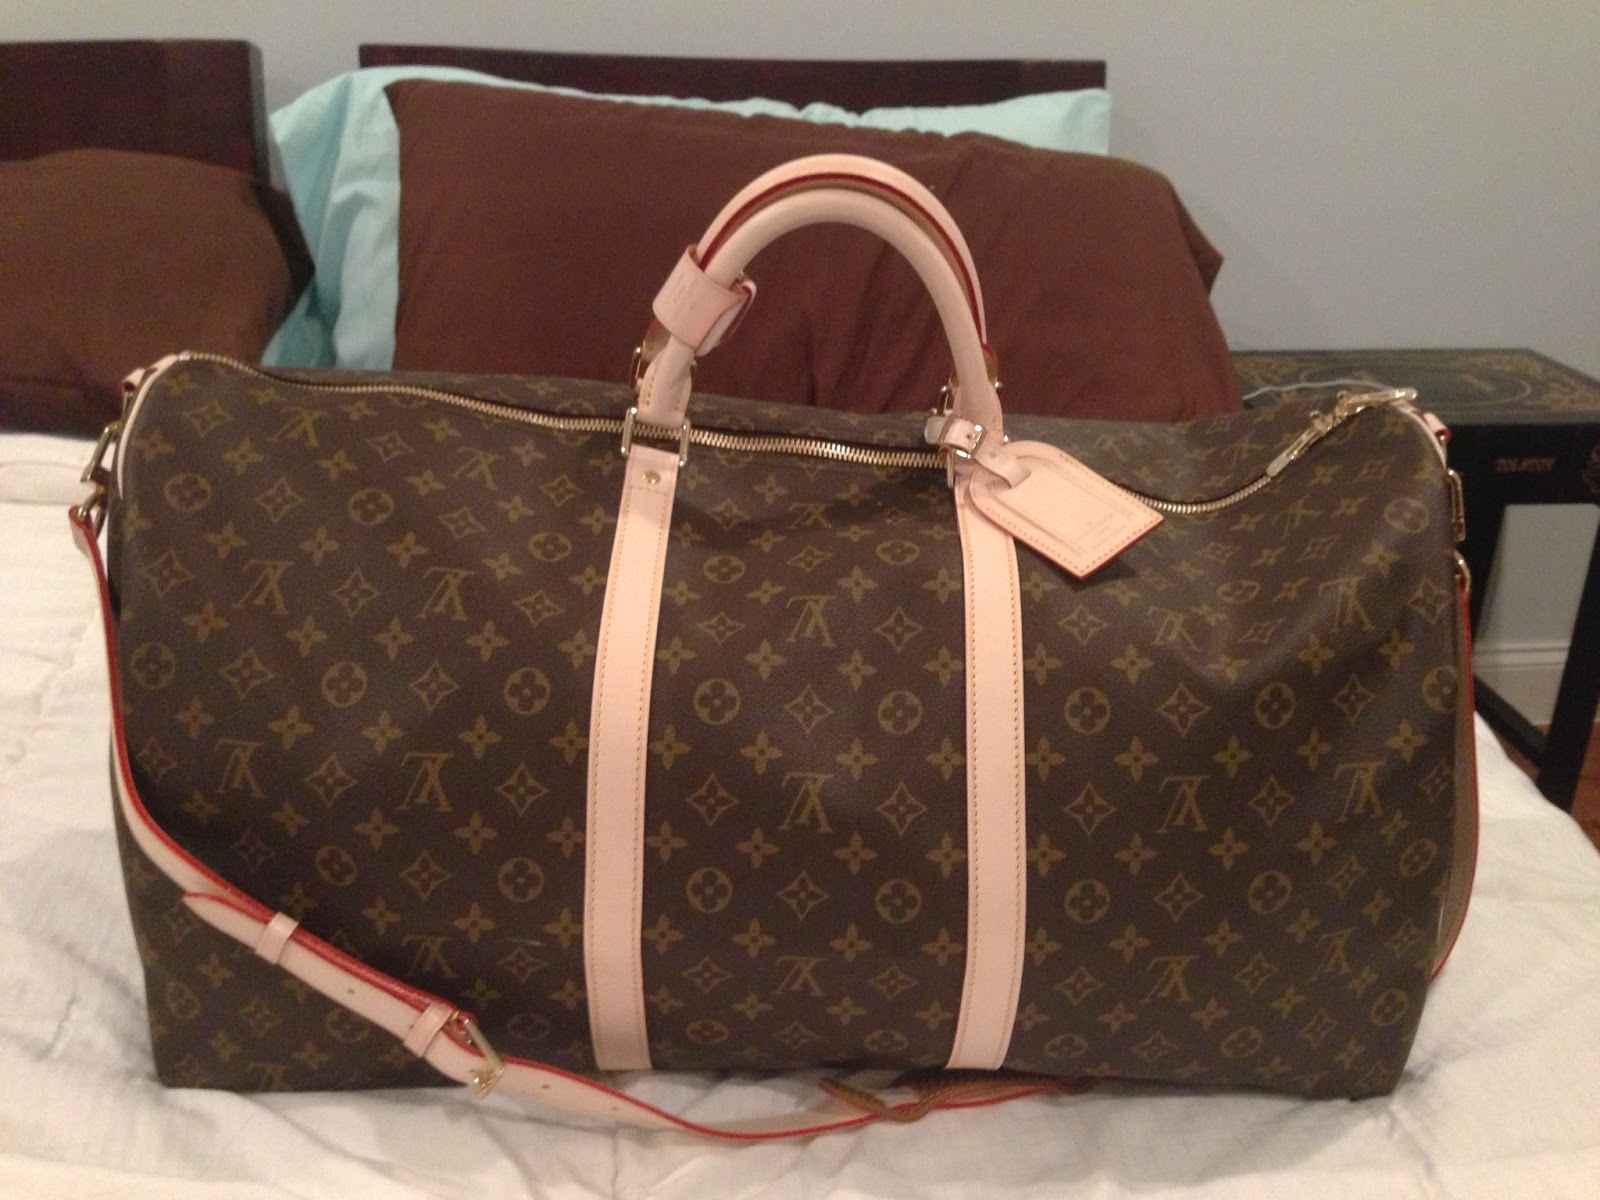 Louis Vuitton Replica Luggage Sets | Confederated Tribes of the Umatilla Indian Reservation